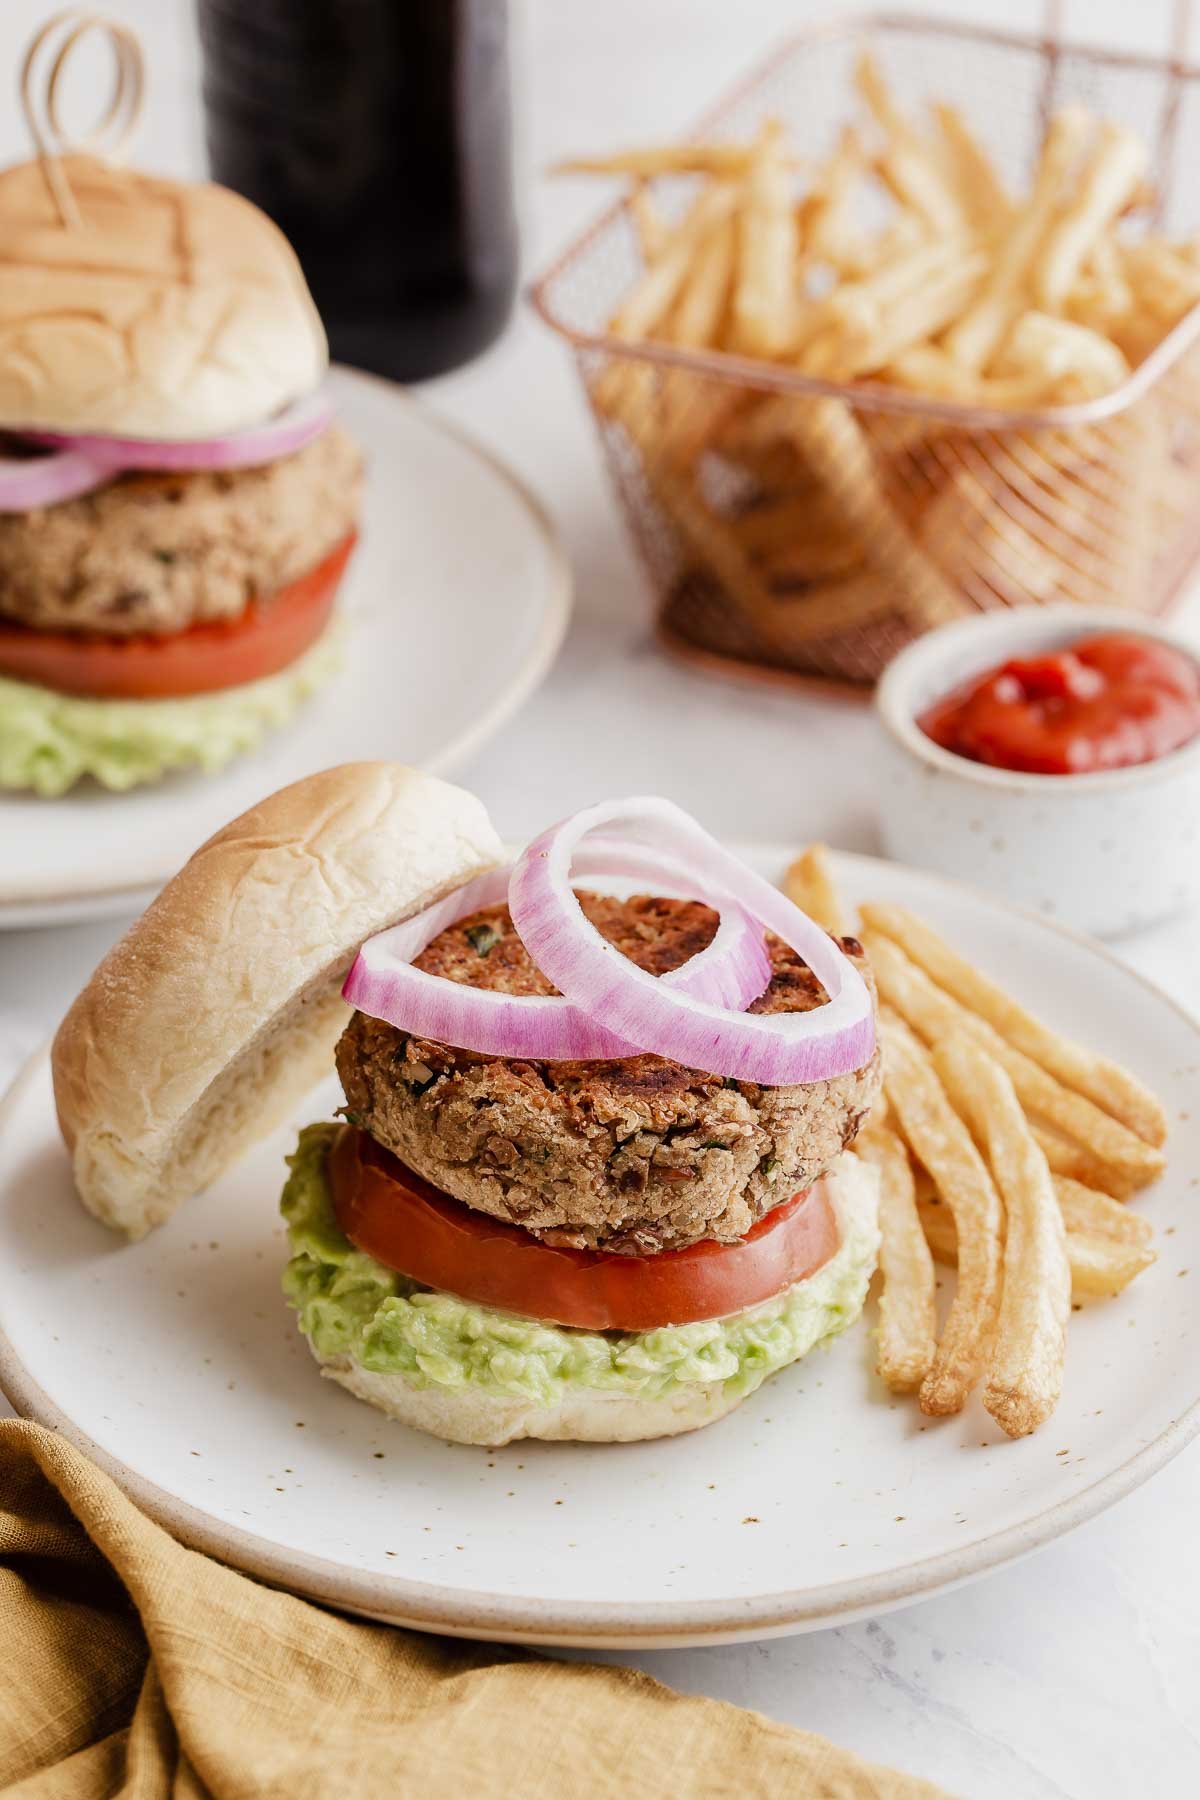 Pinto bean burgers with sliced red onions on top.